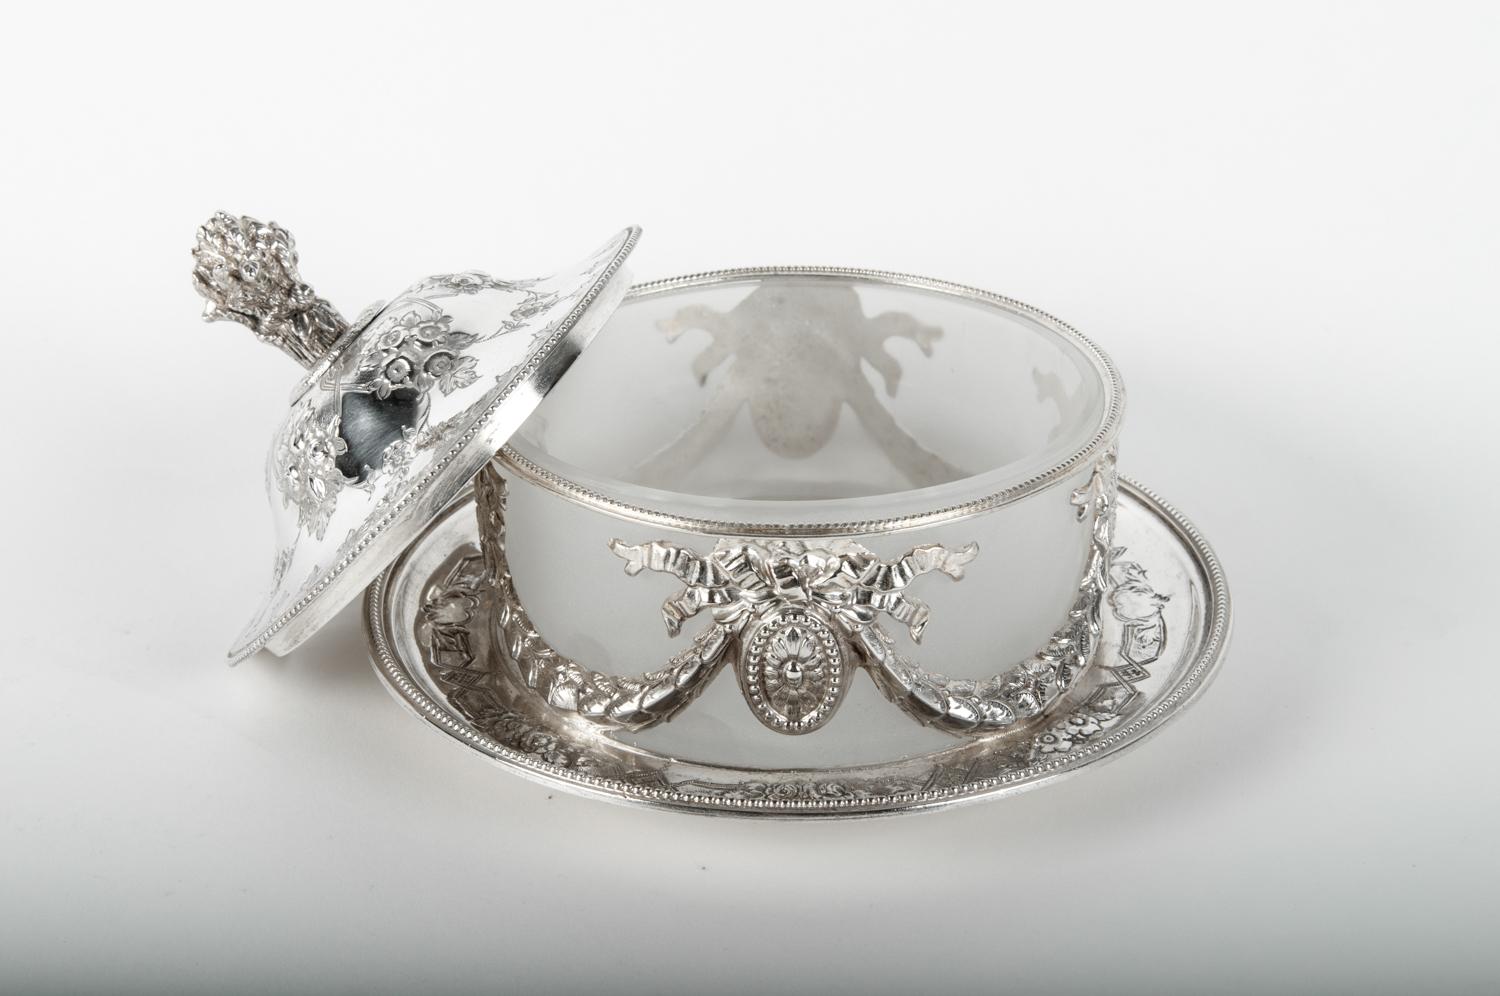 19th Century Old English Sheffield Silver Plate Tableware Dish